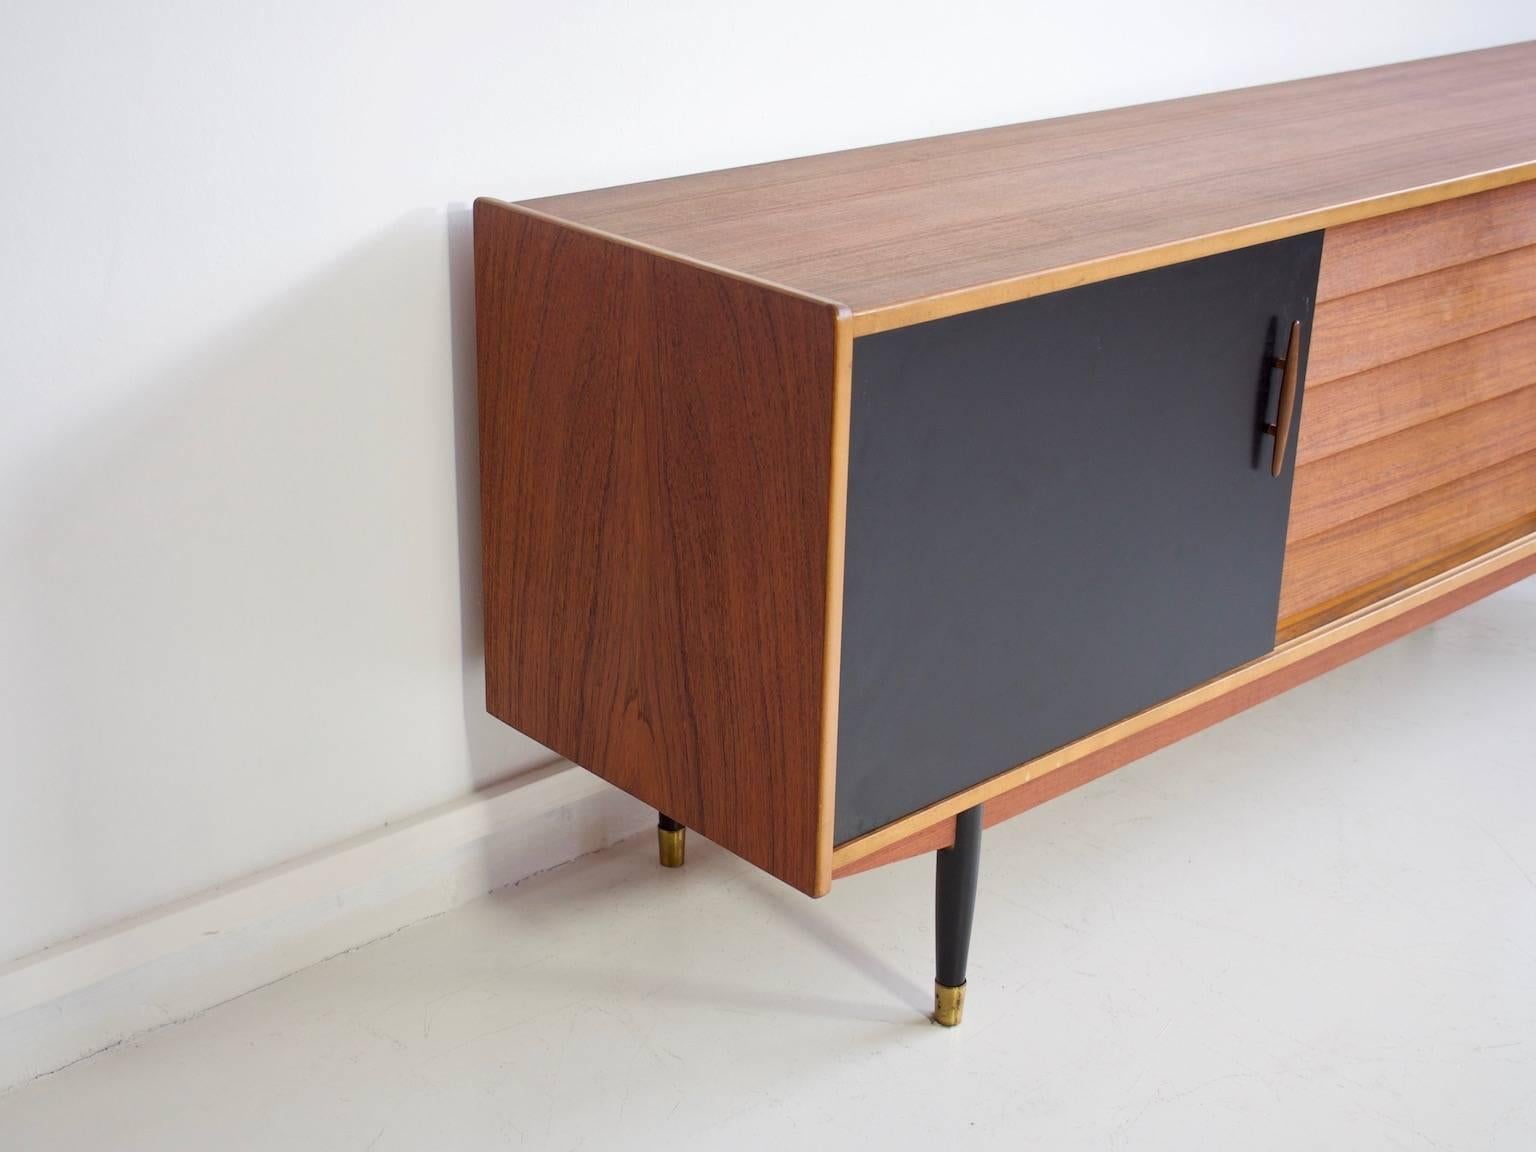 Brass Long Teak Sideboard with Drawers and Black Sliding Doors by Hugo Troeds